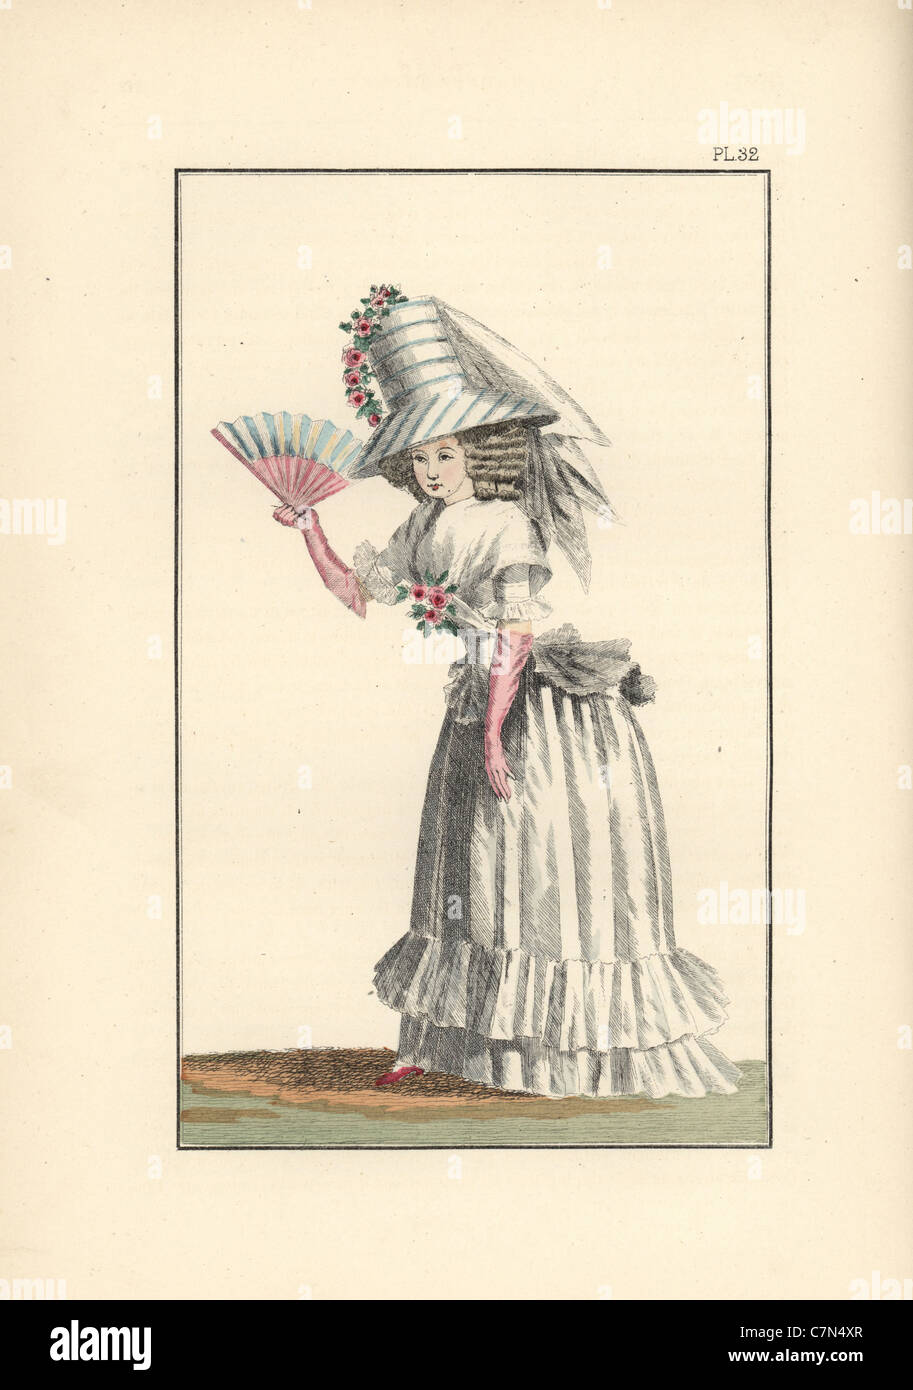 Woman in a white chiffon dress, white petticoat with double furbelow, and a tall white taffeta Theodore hat. Stock Photo